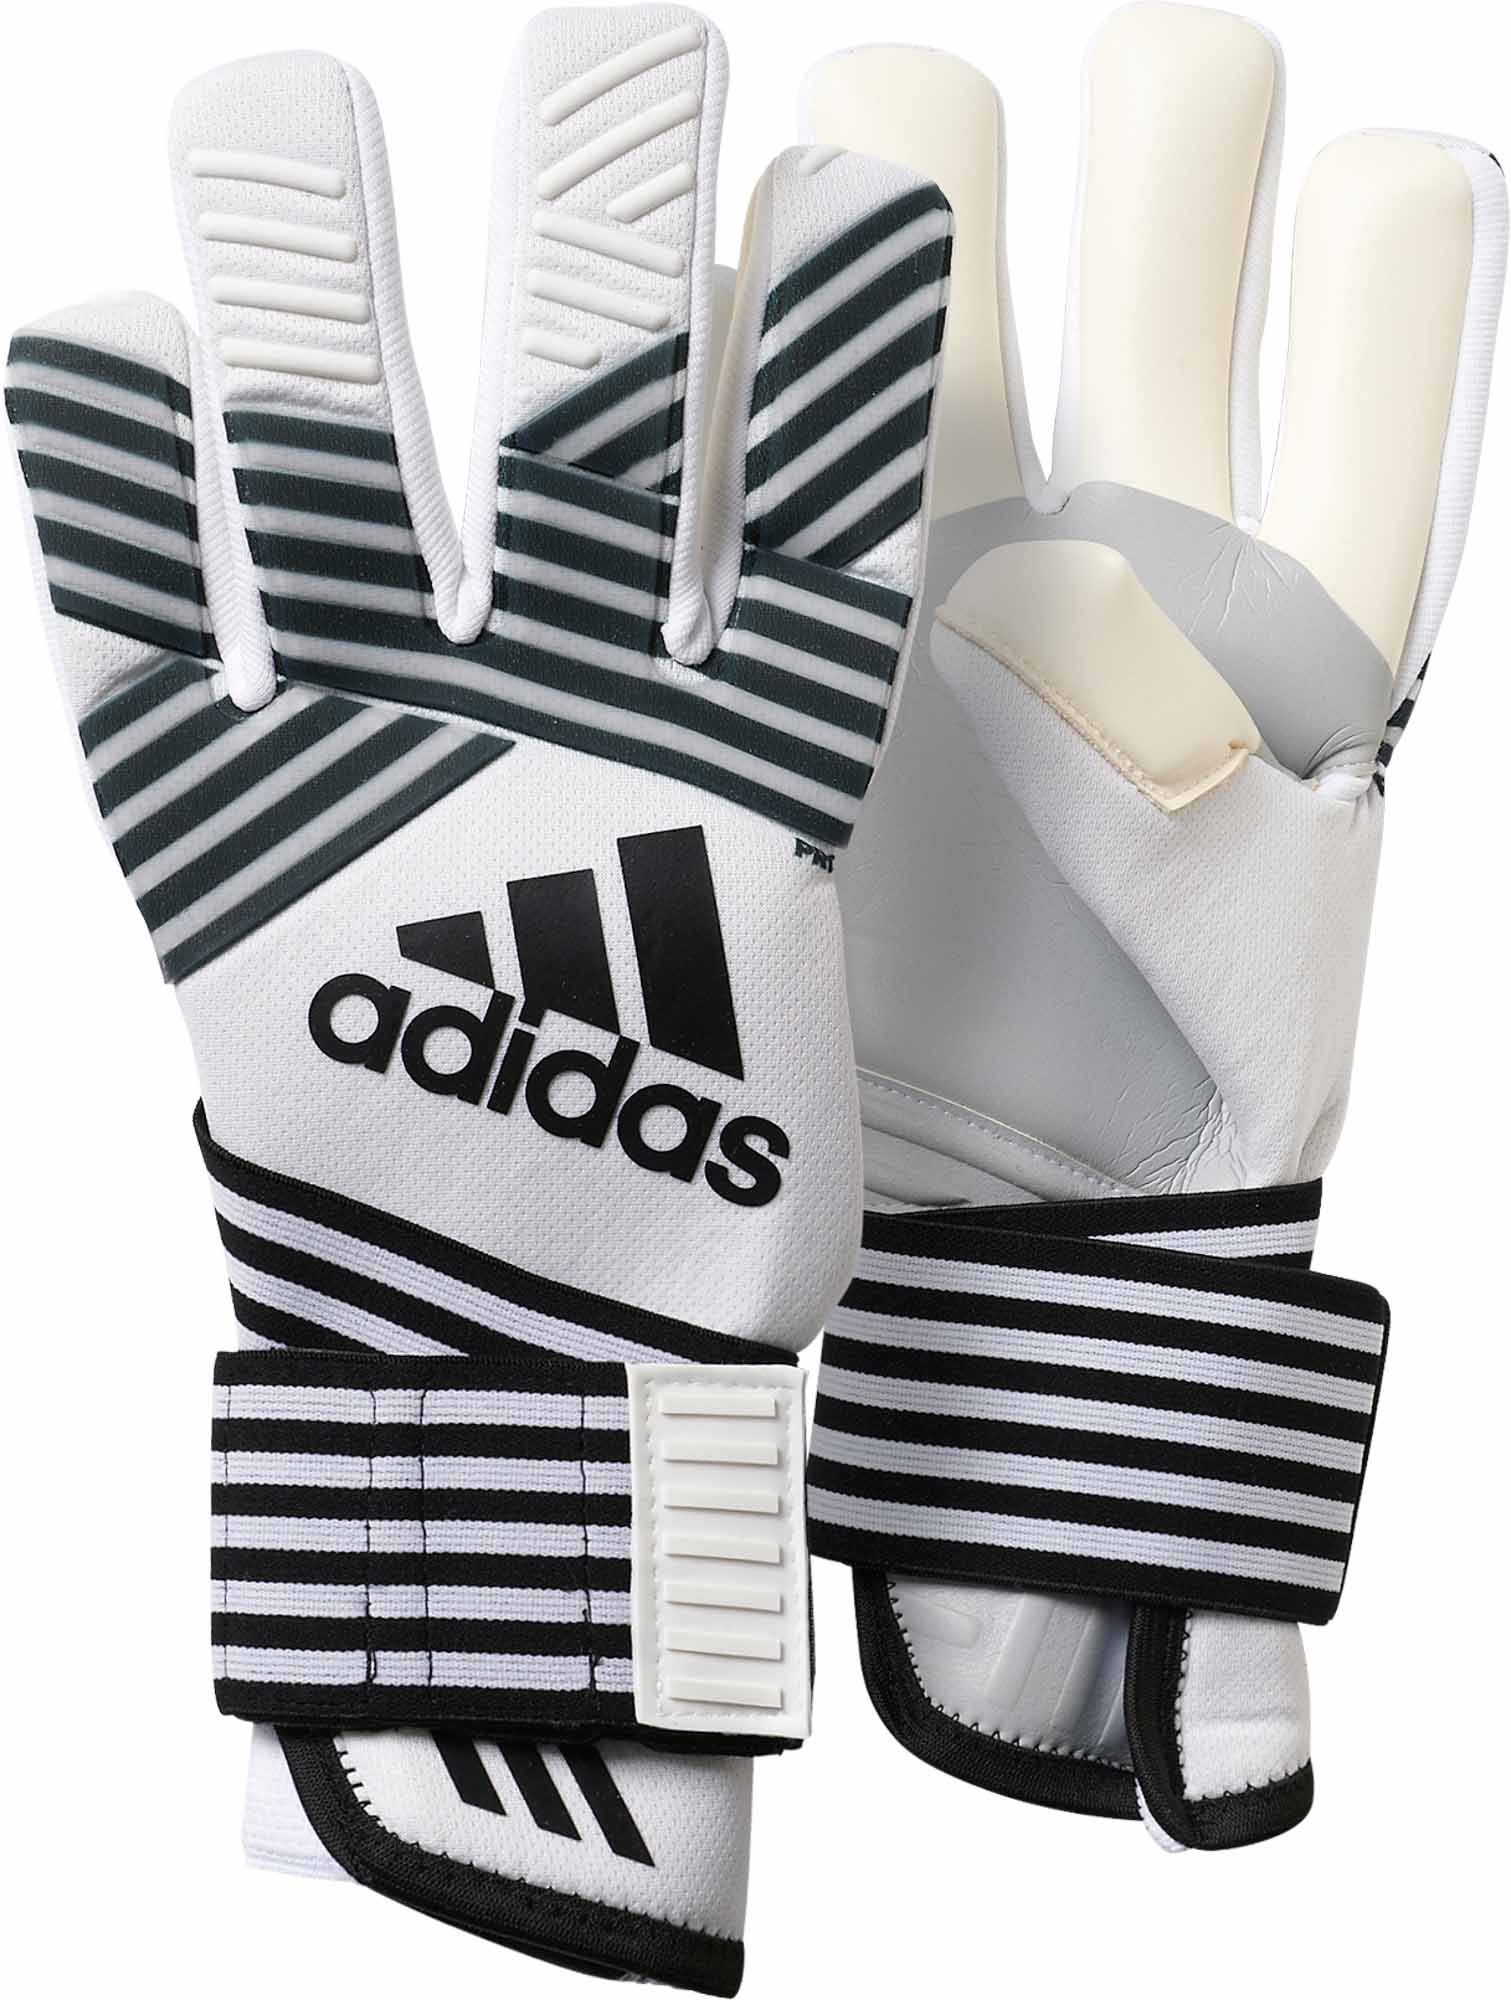 Buy > adidas ace pro > in stock